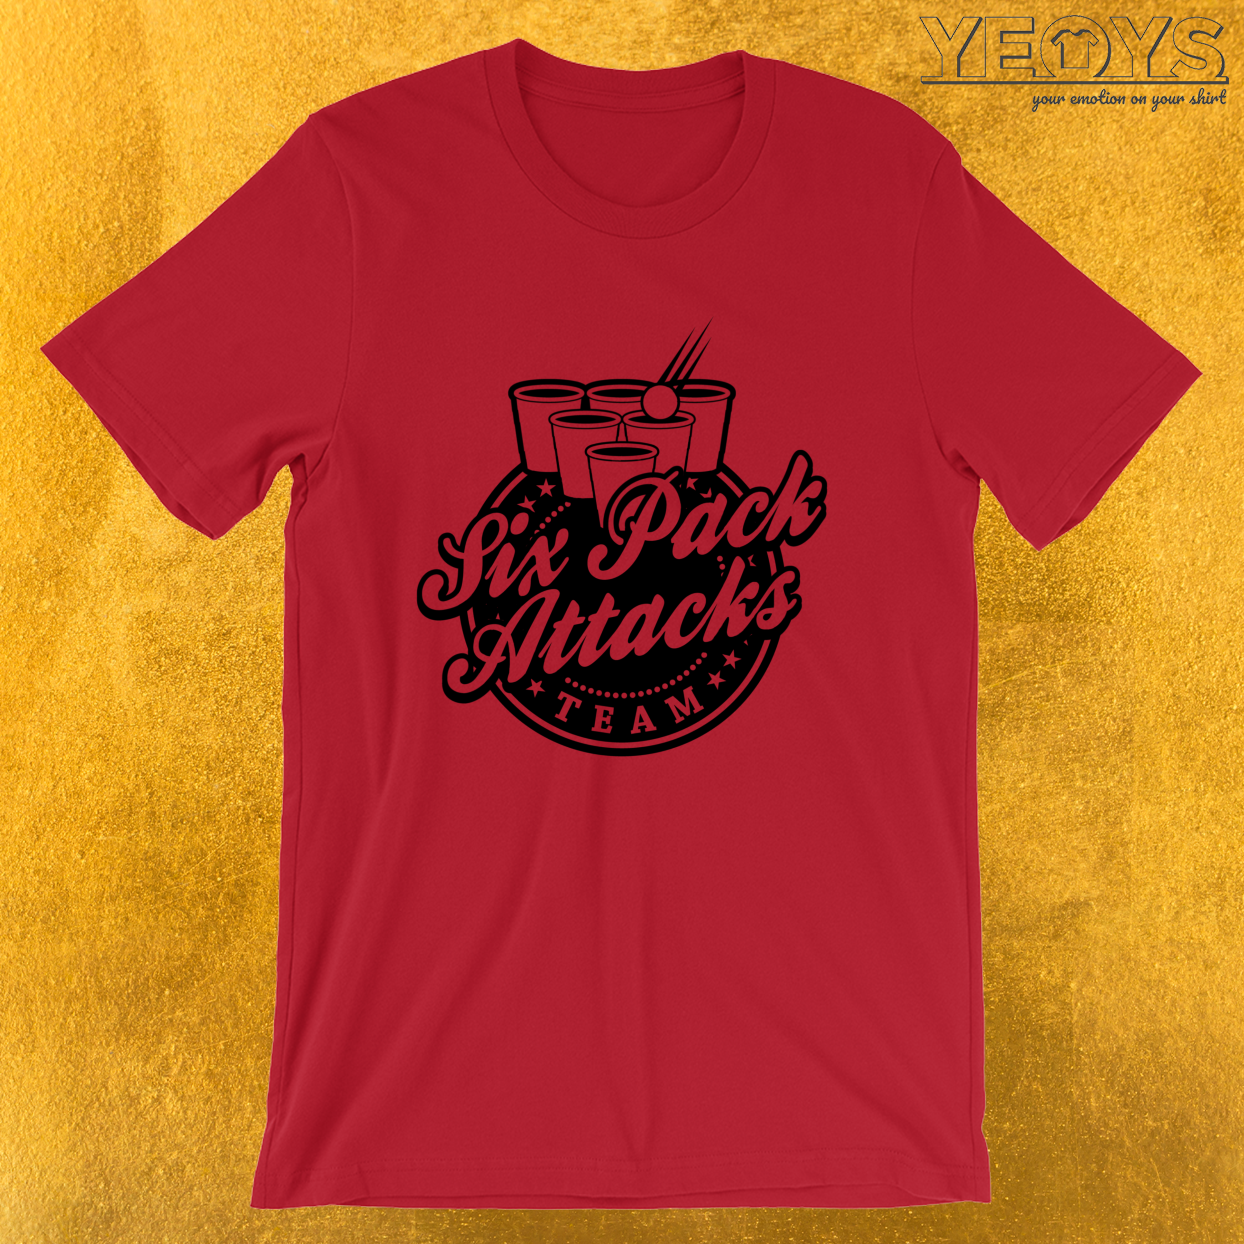 Team Six Pack Attacks – USA Beer Pong Team Tee